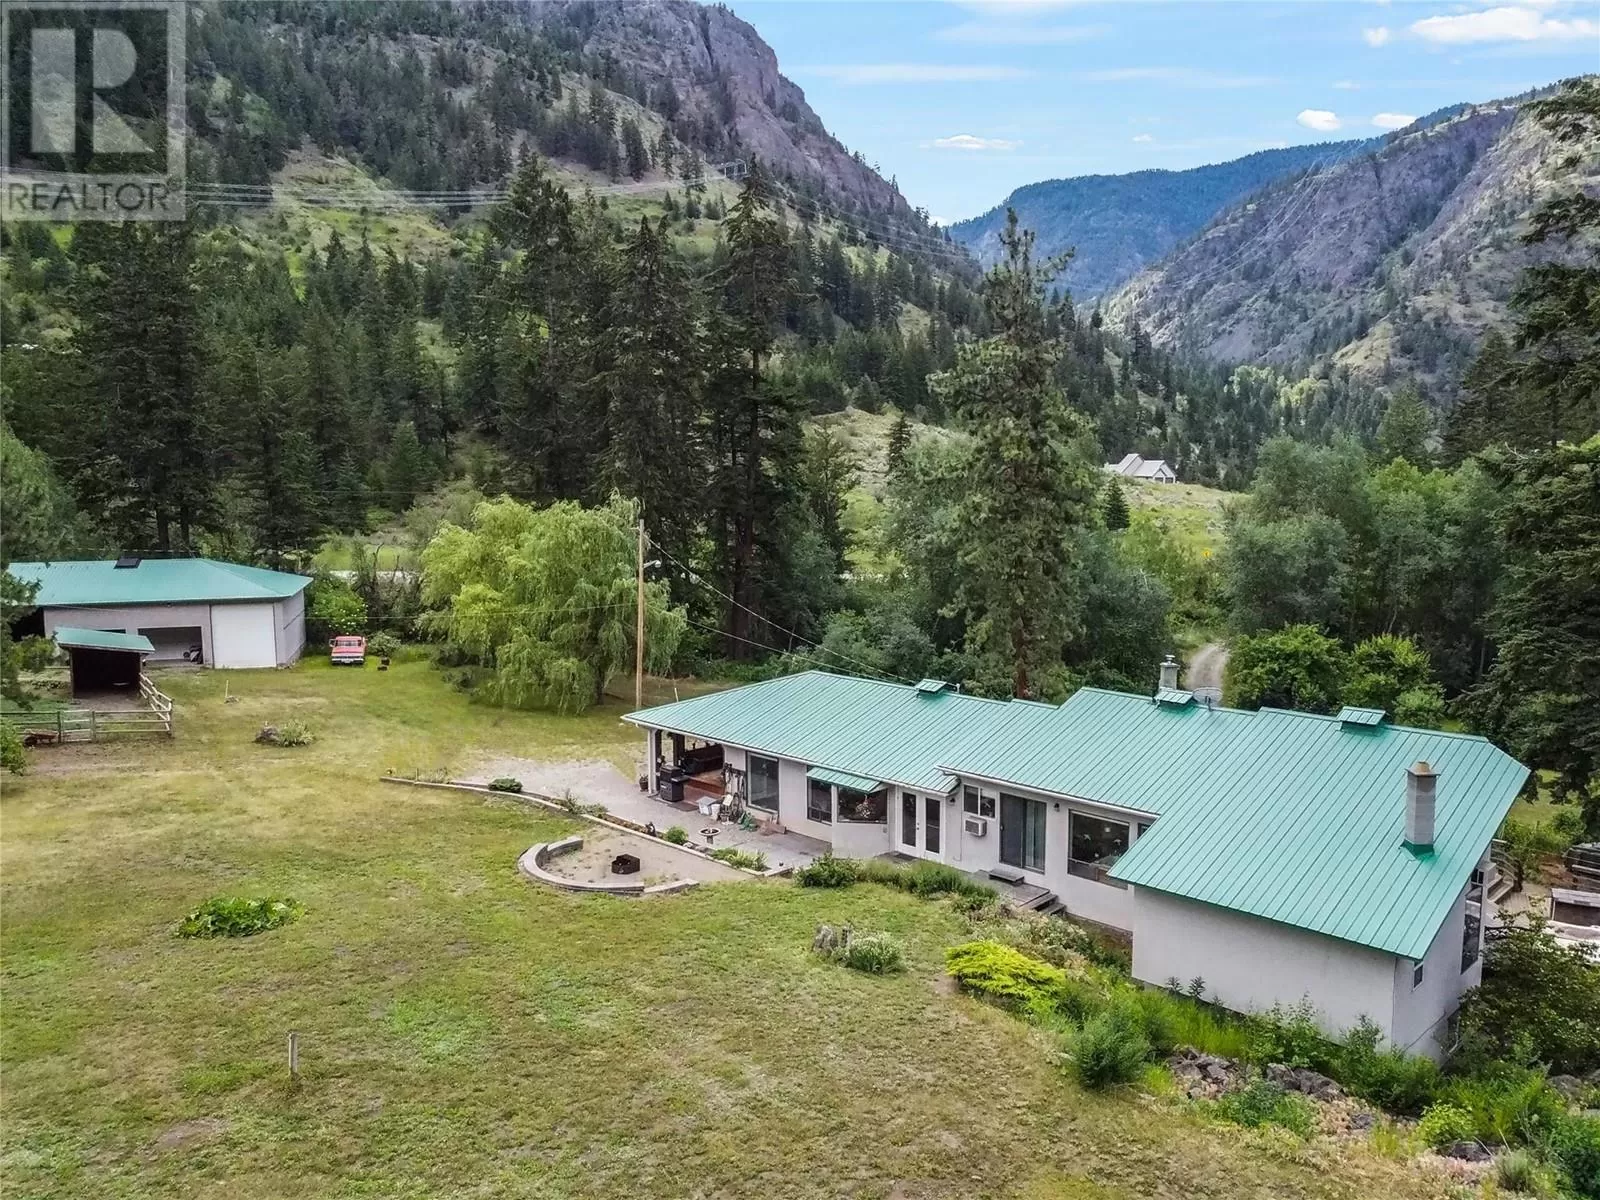 House for rent: 1196 Hwy 3a, Keremeos, British Columbia V0X 1N4